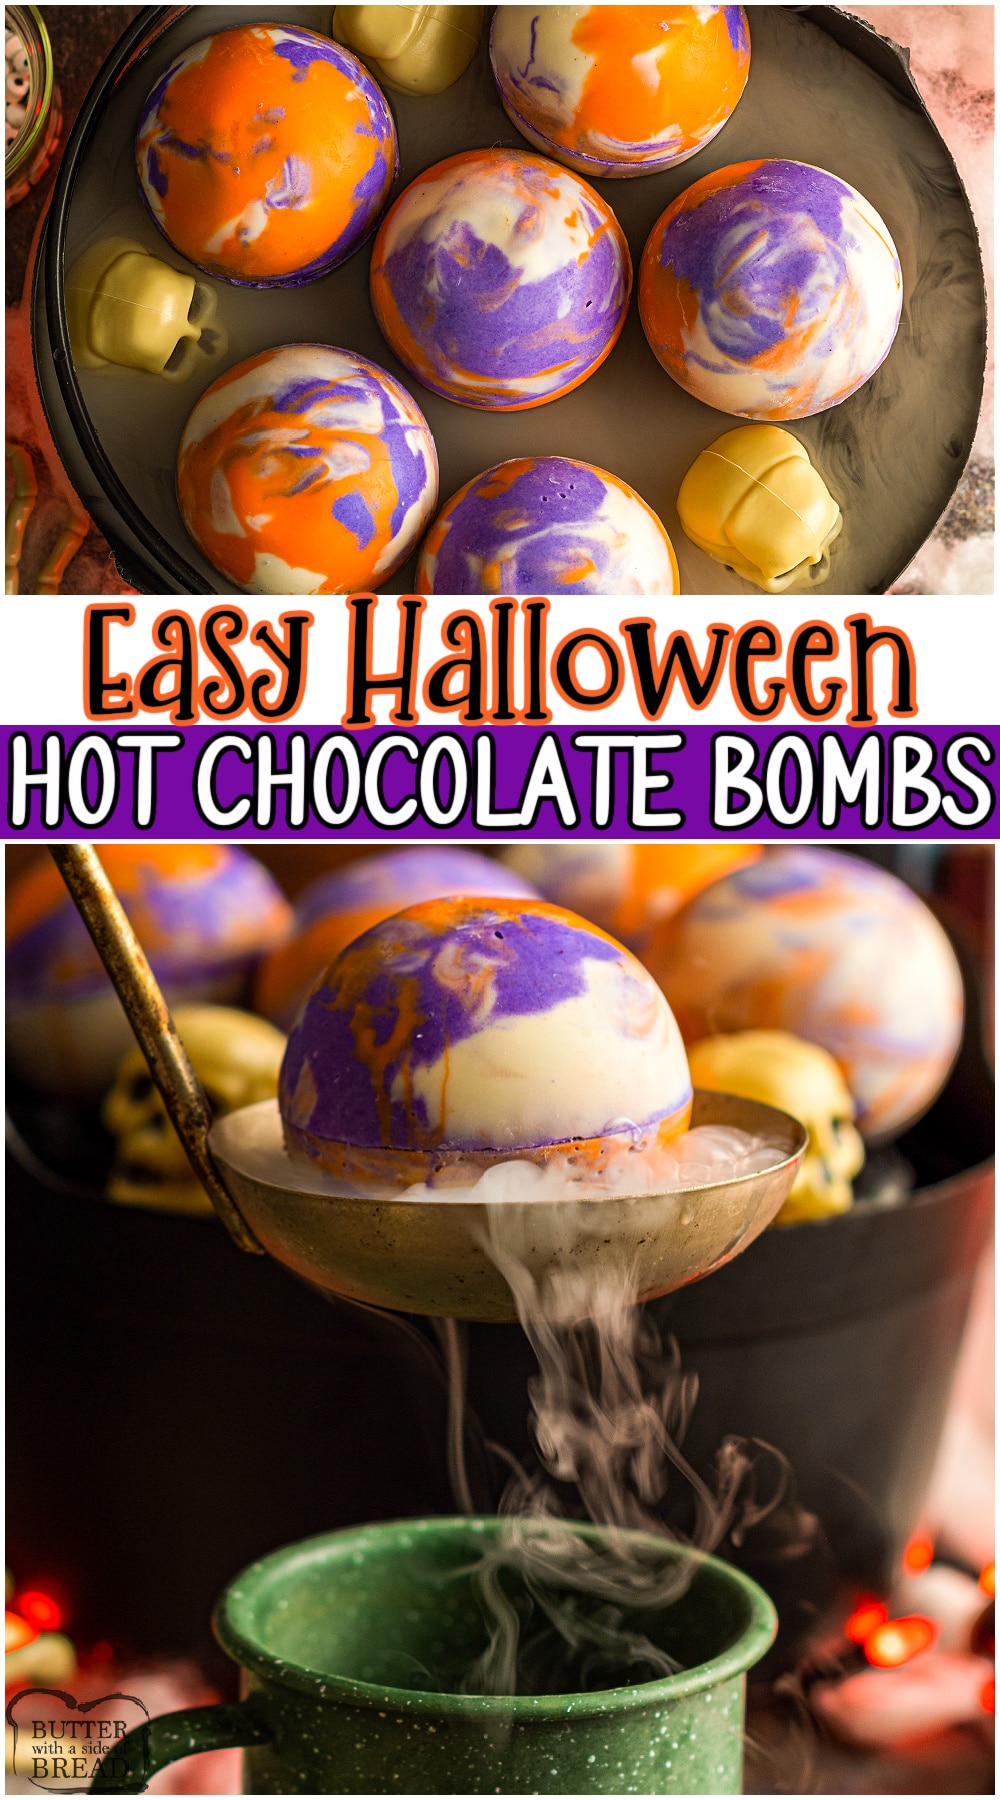 Halloween chocolate bombs are a fun and spooky way to celebrate! Brightly colored, festive hot chocolate bombs are the perfect homemade Halloween treat! #hotchocolate #Halloween #chocolate #homemade #easyrecipe from BUTTER WITH A SIDE OF BREAD